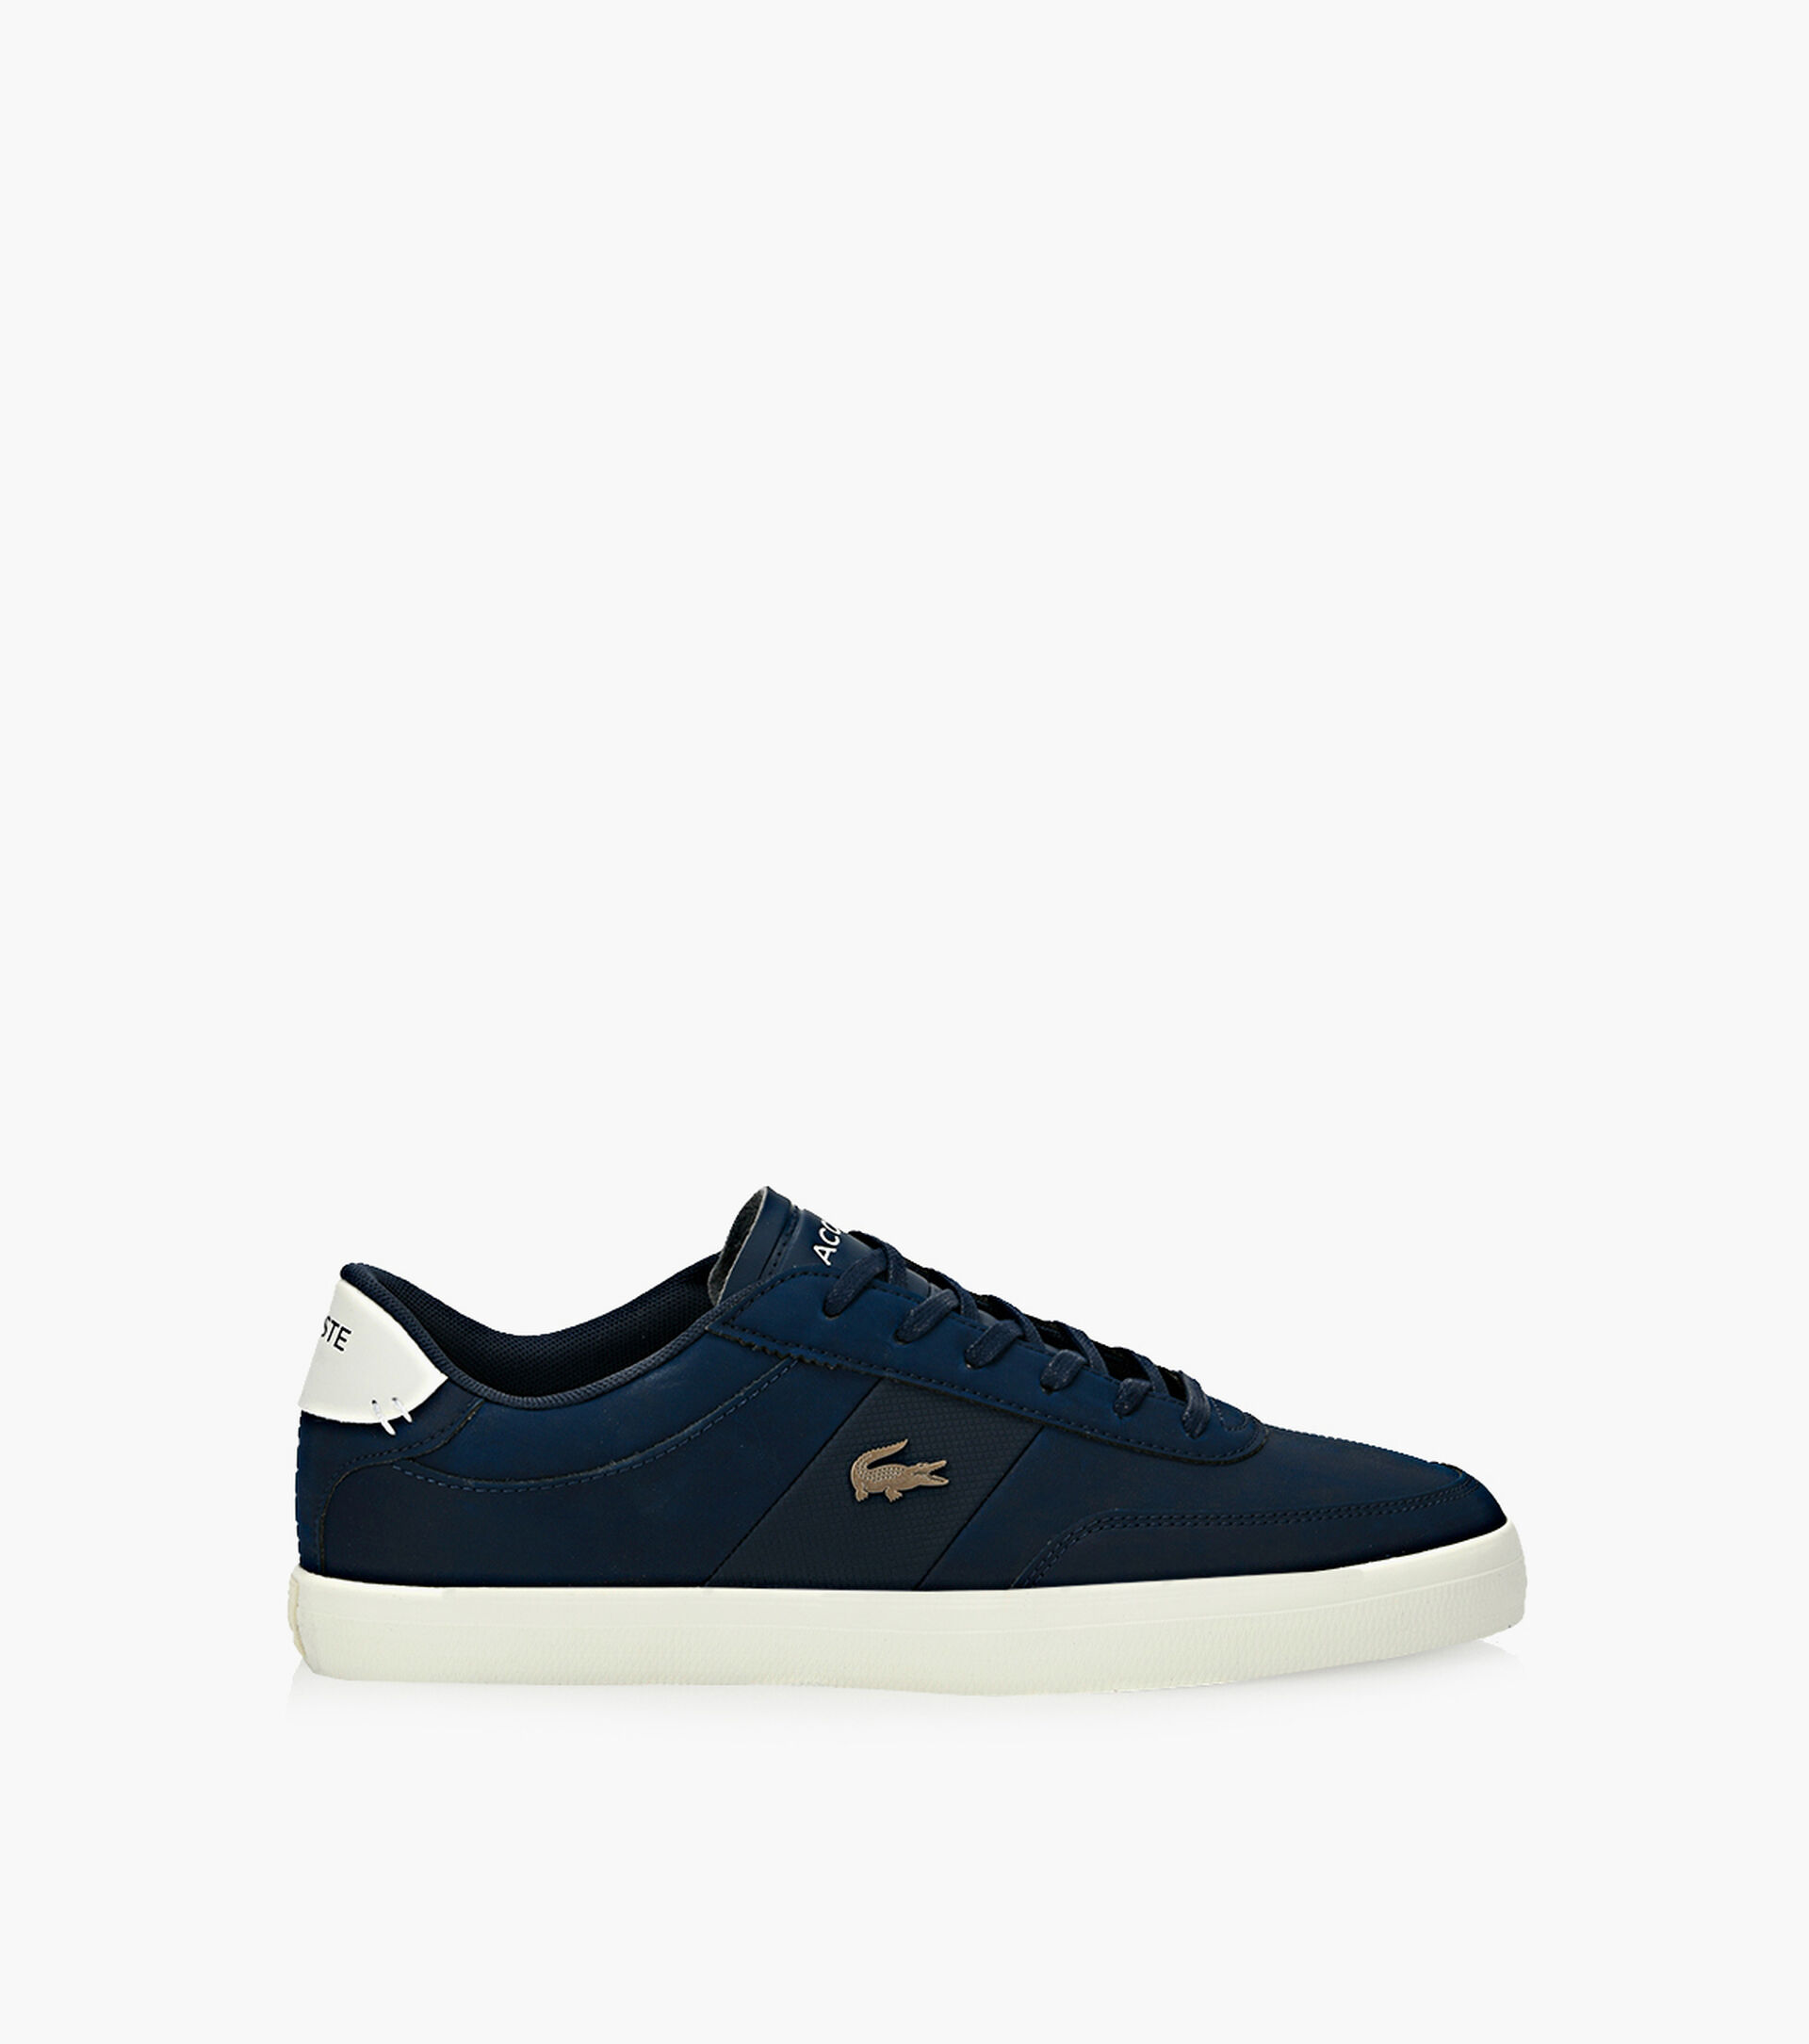 LACOSTE COURT-MASTER 119-3 CMA - Blue Leather | Browns Shoes